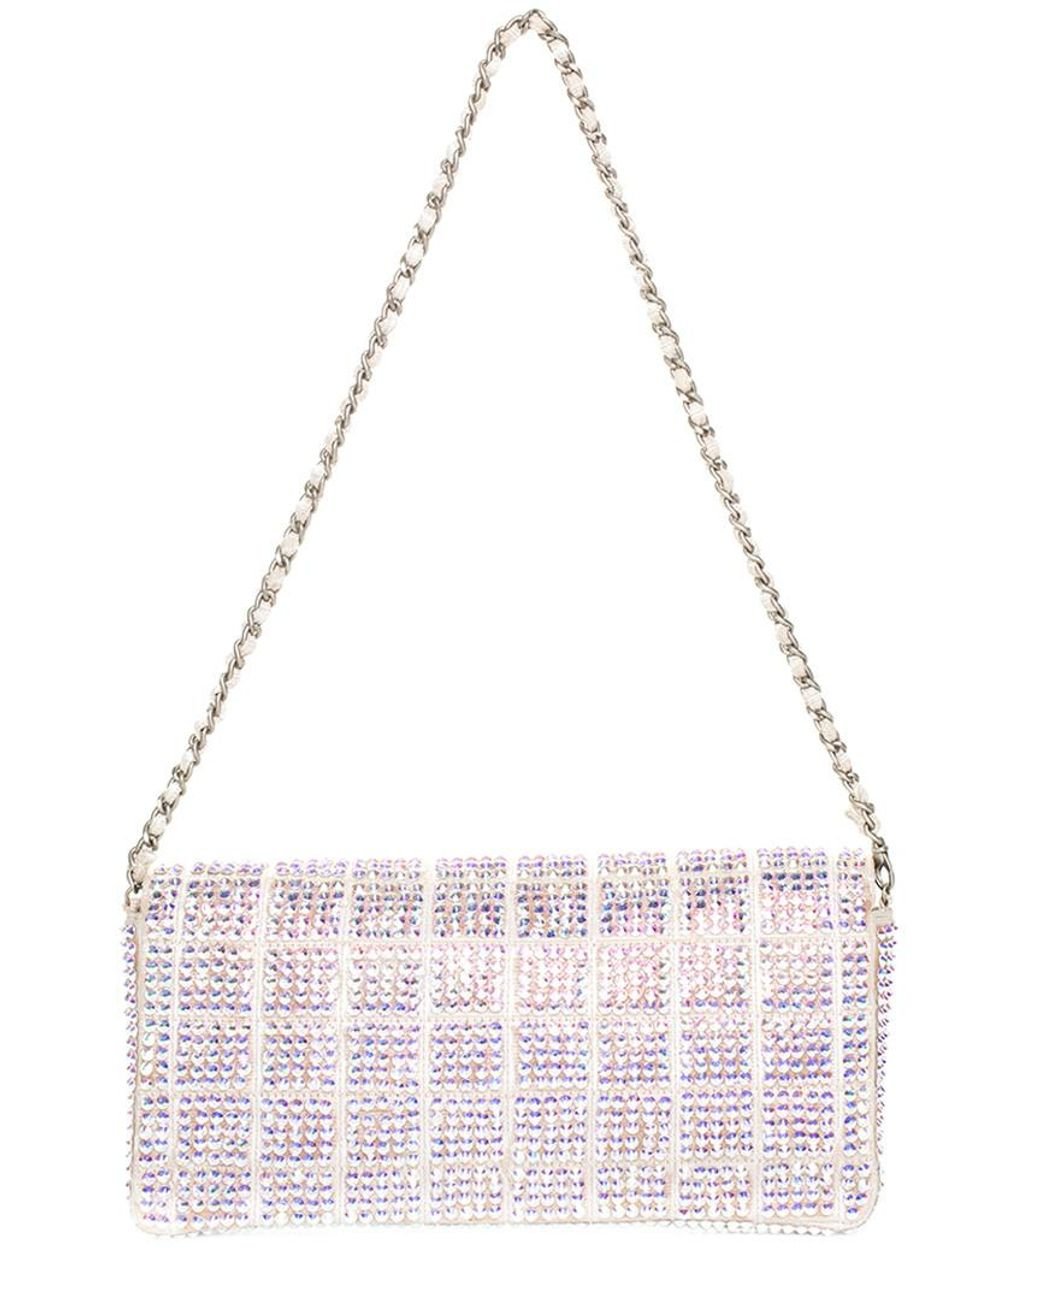 Chanel Multicolor Strass Flap Bag of Swarovski Crystals and Grey Leather  with Silver Tone Hardware  Handbags and Accessories Online  Ecommerce  Retail  Sothebys